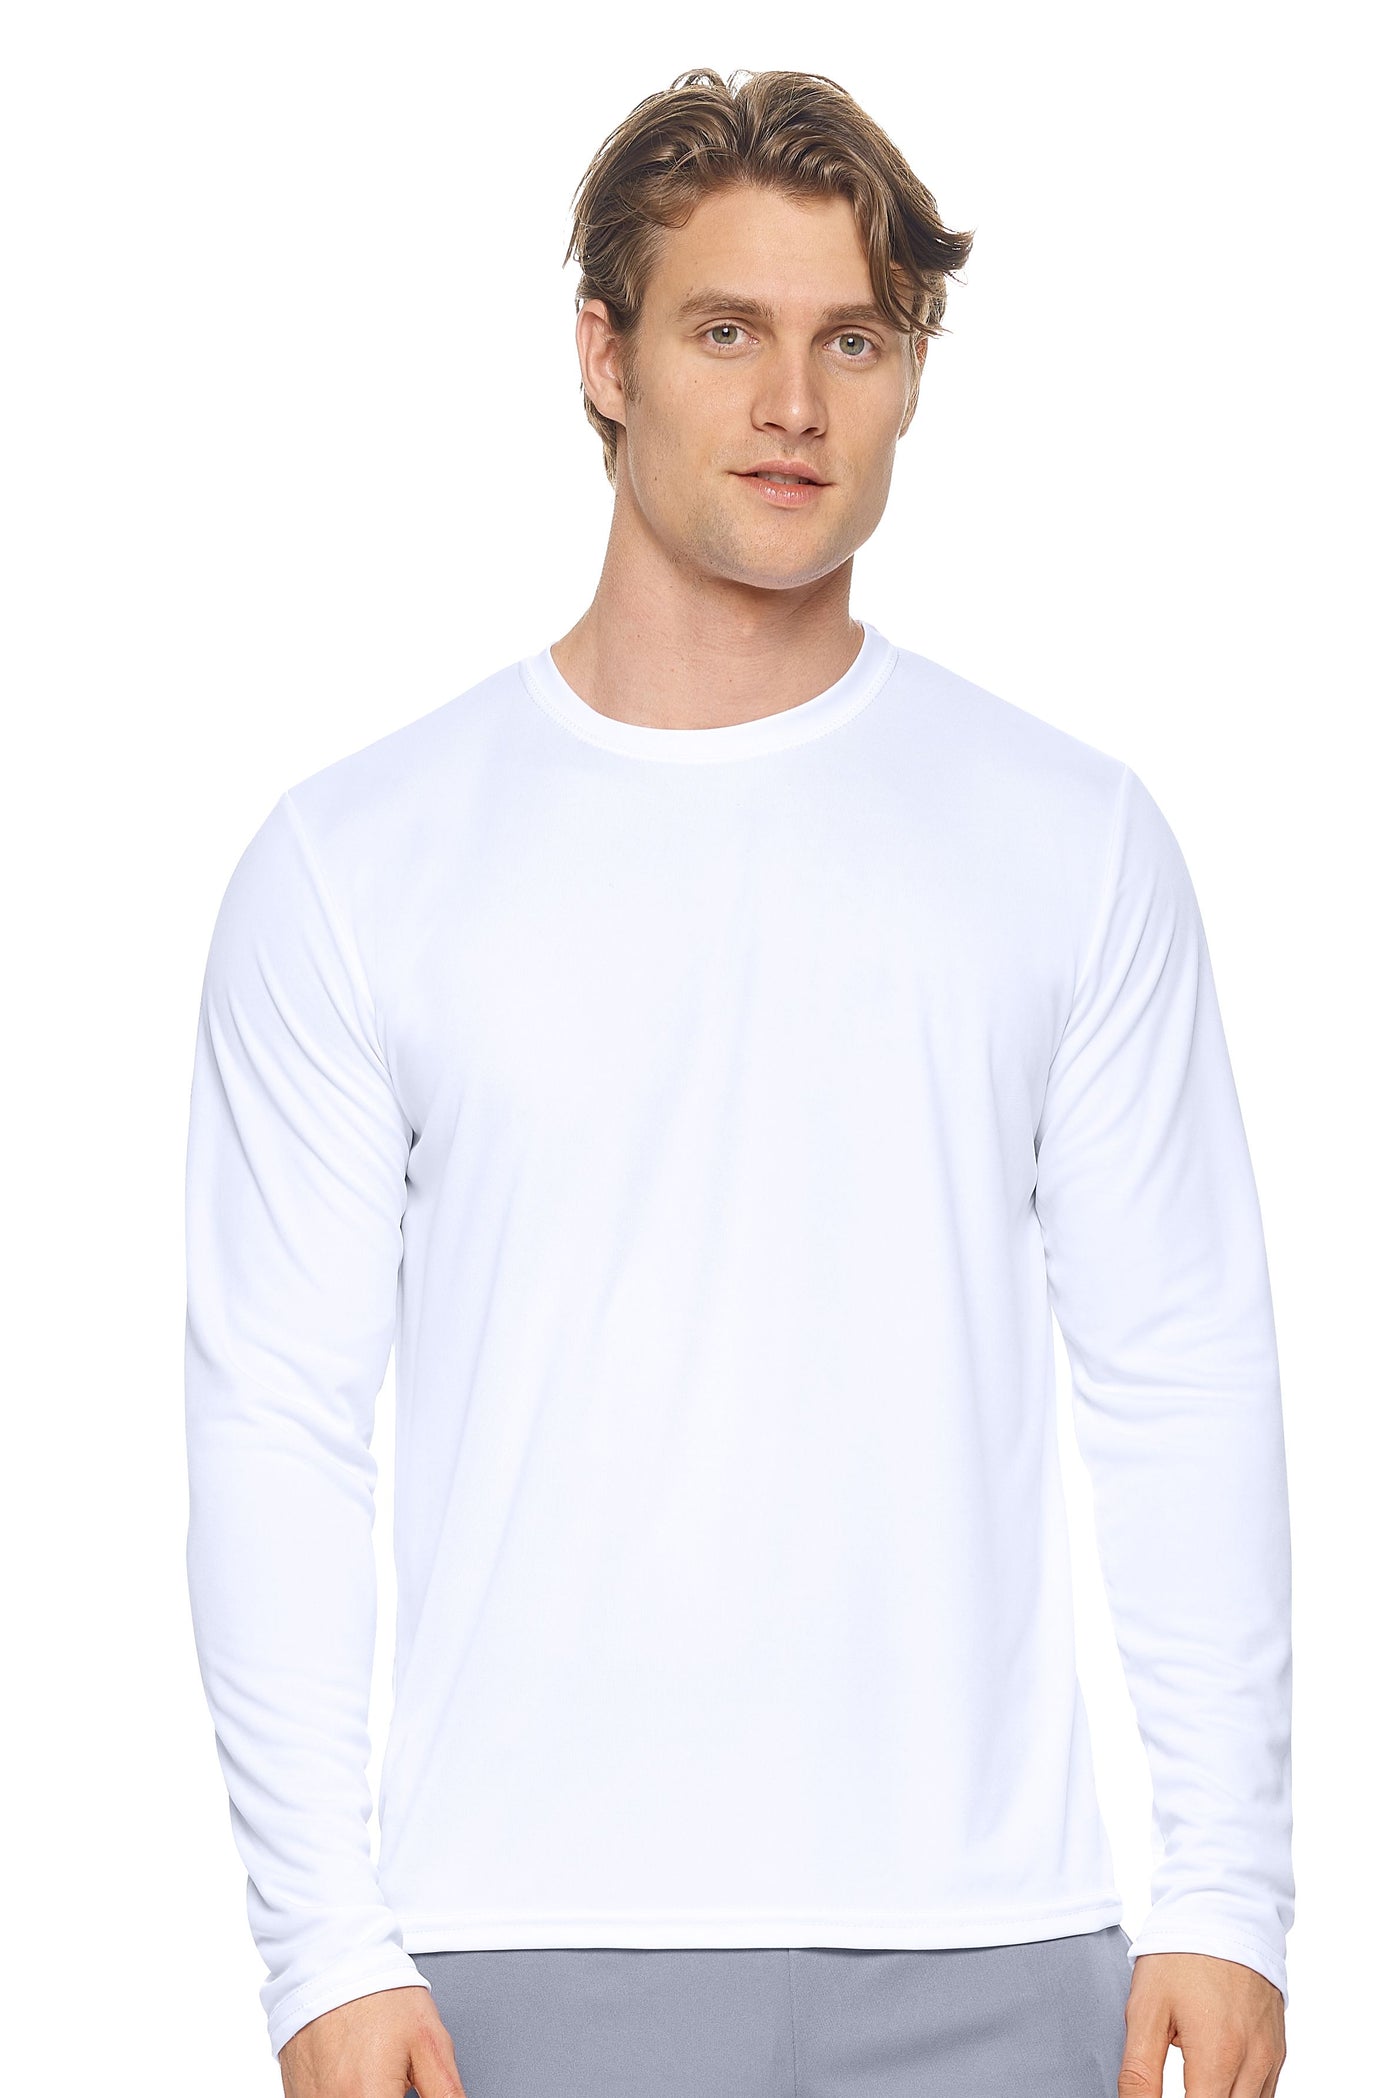 Expert Brand Retail Activewear Men's Sportswear Performance Fitness Crewneck Long Sleeve Tec Shirt Made in USA in white#color_white